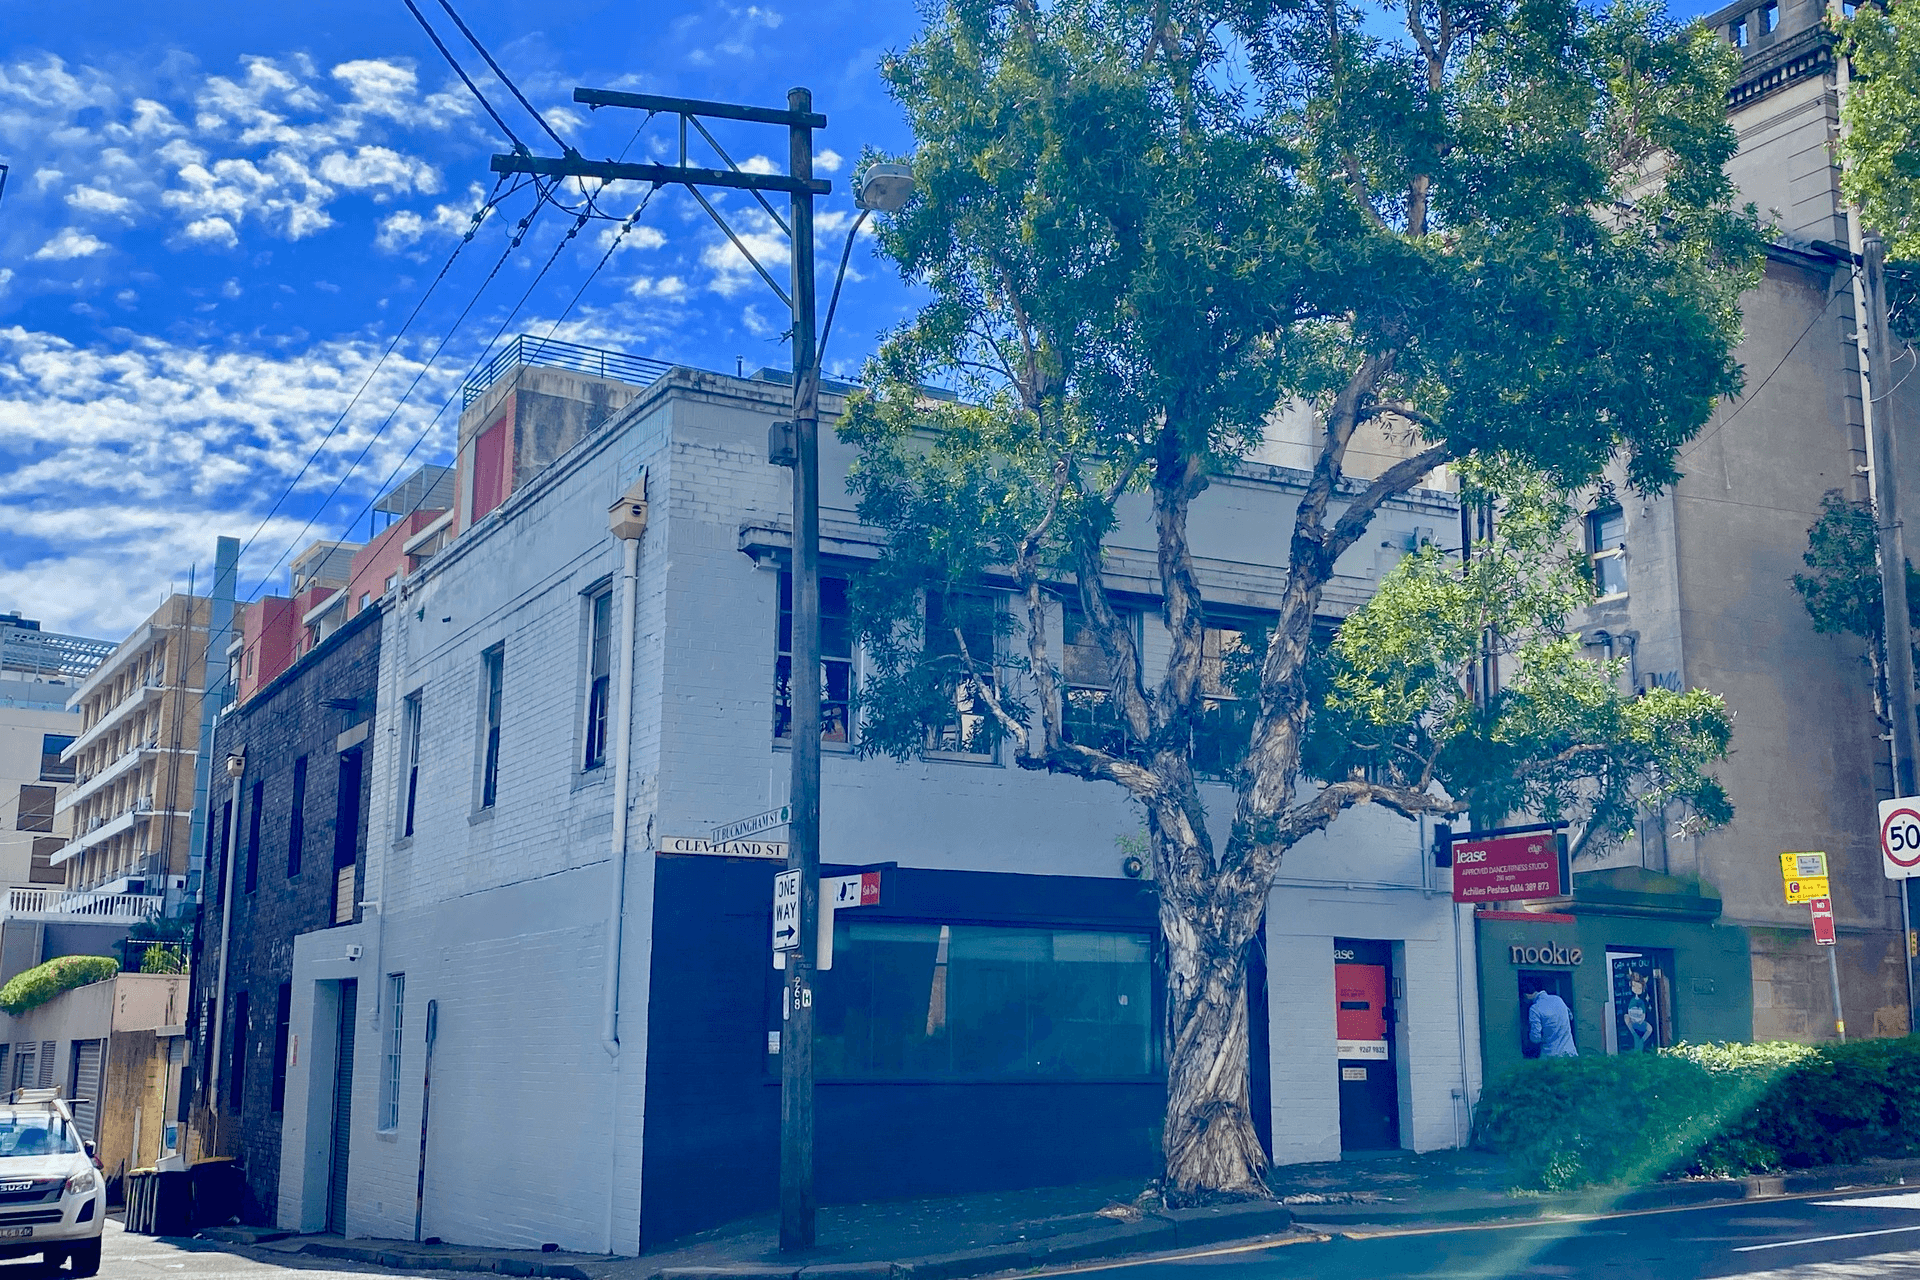 Level 1/268 Cleveland Street, Surry Hills, NSW 2010